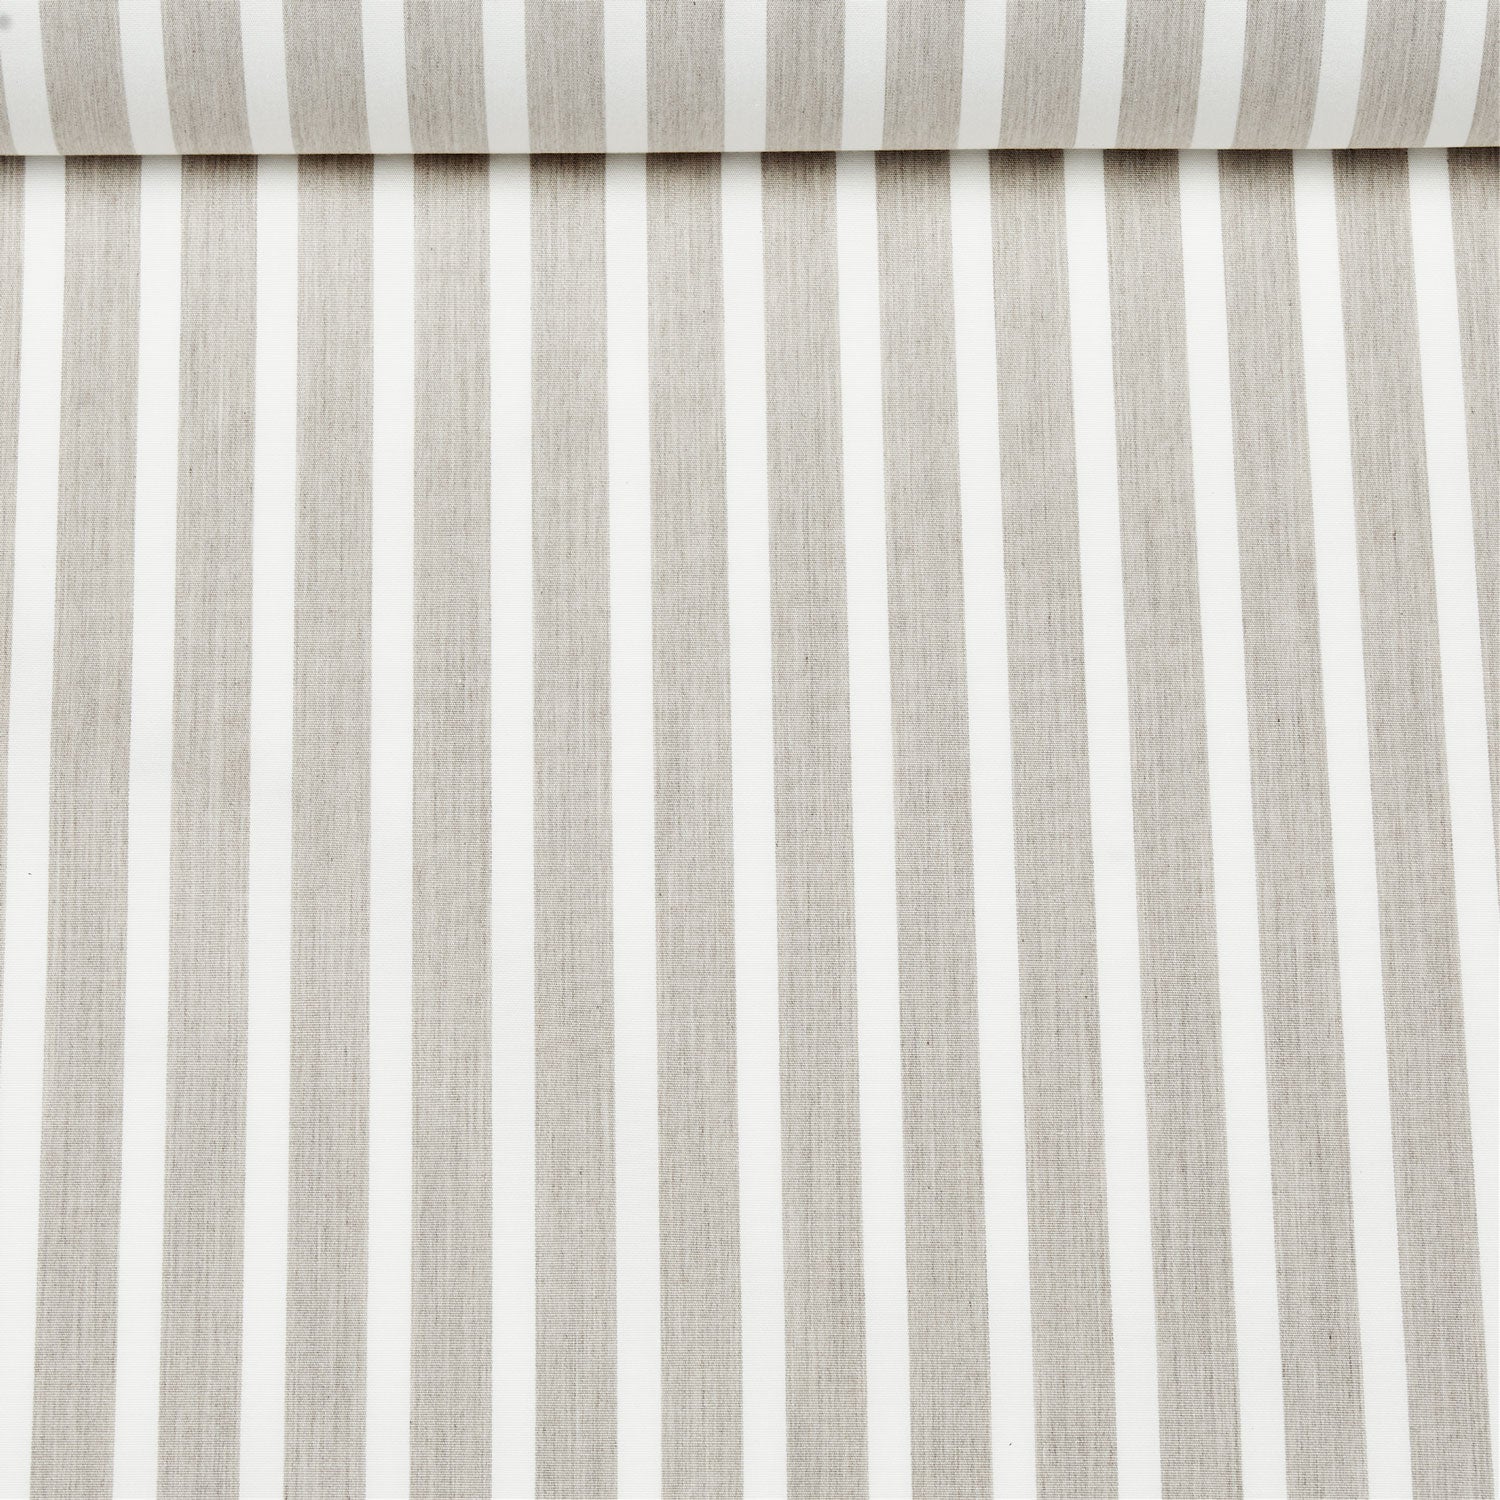 A birds eye view of a jacquard woven white and beige striped pattern outdoor performance fabric roll. 